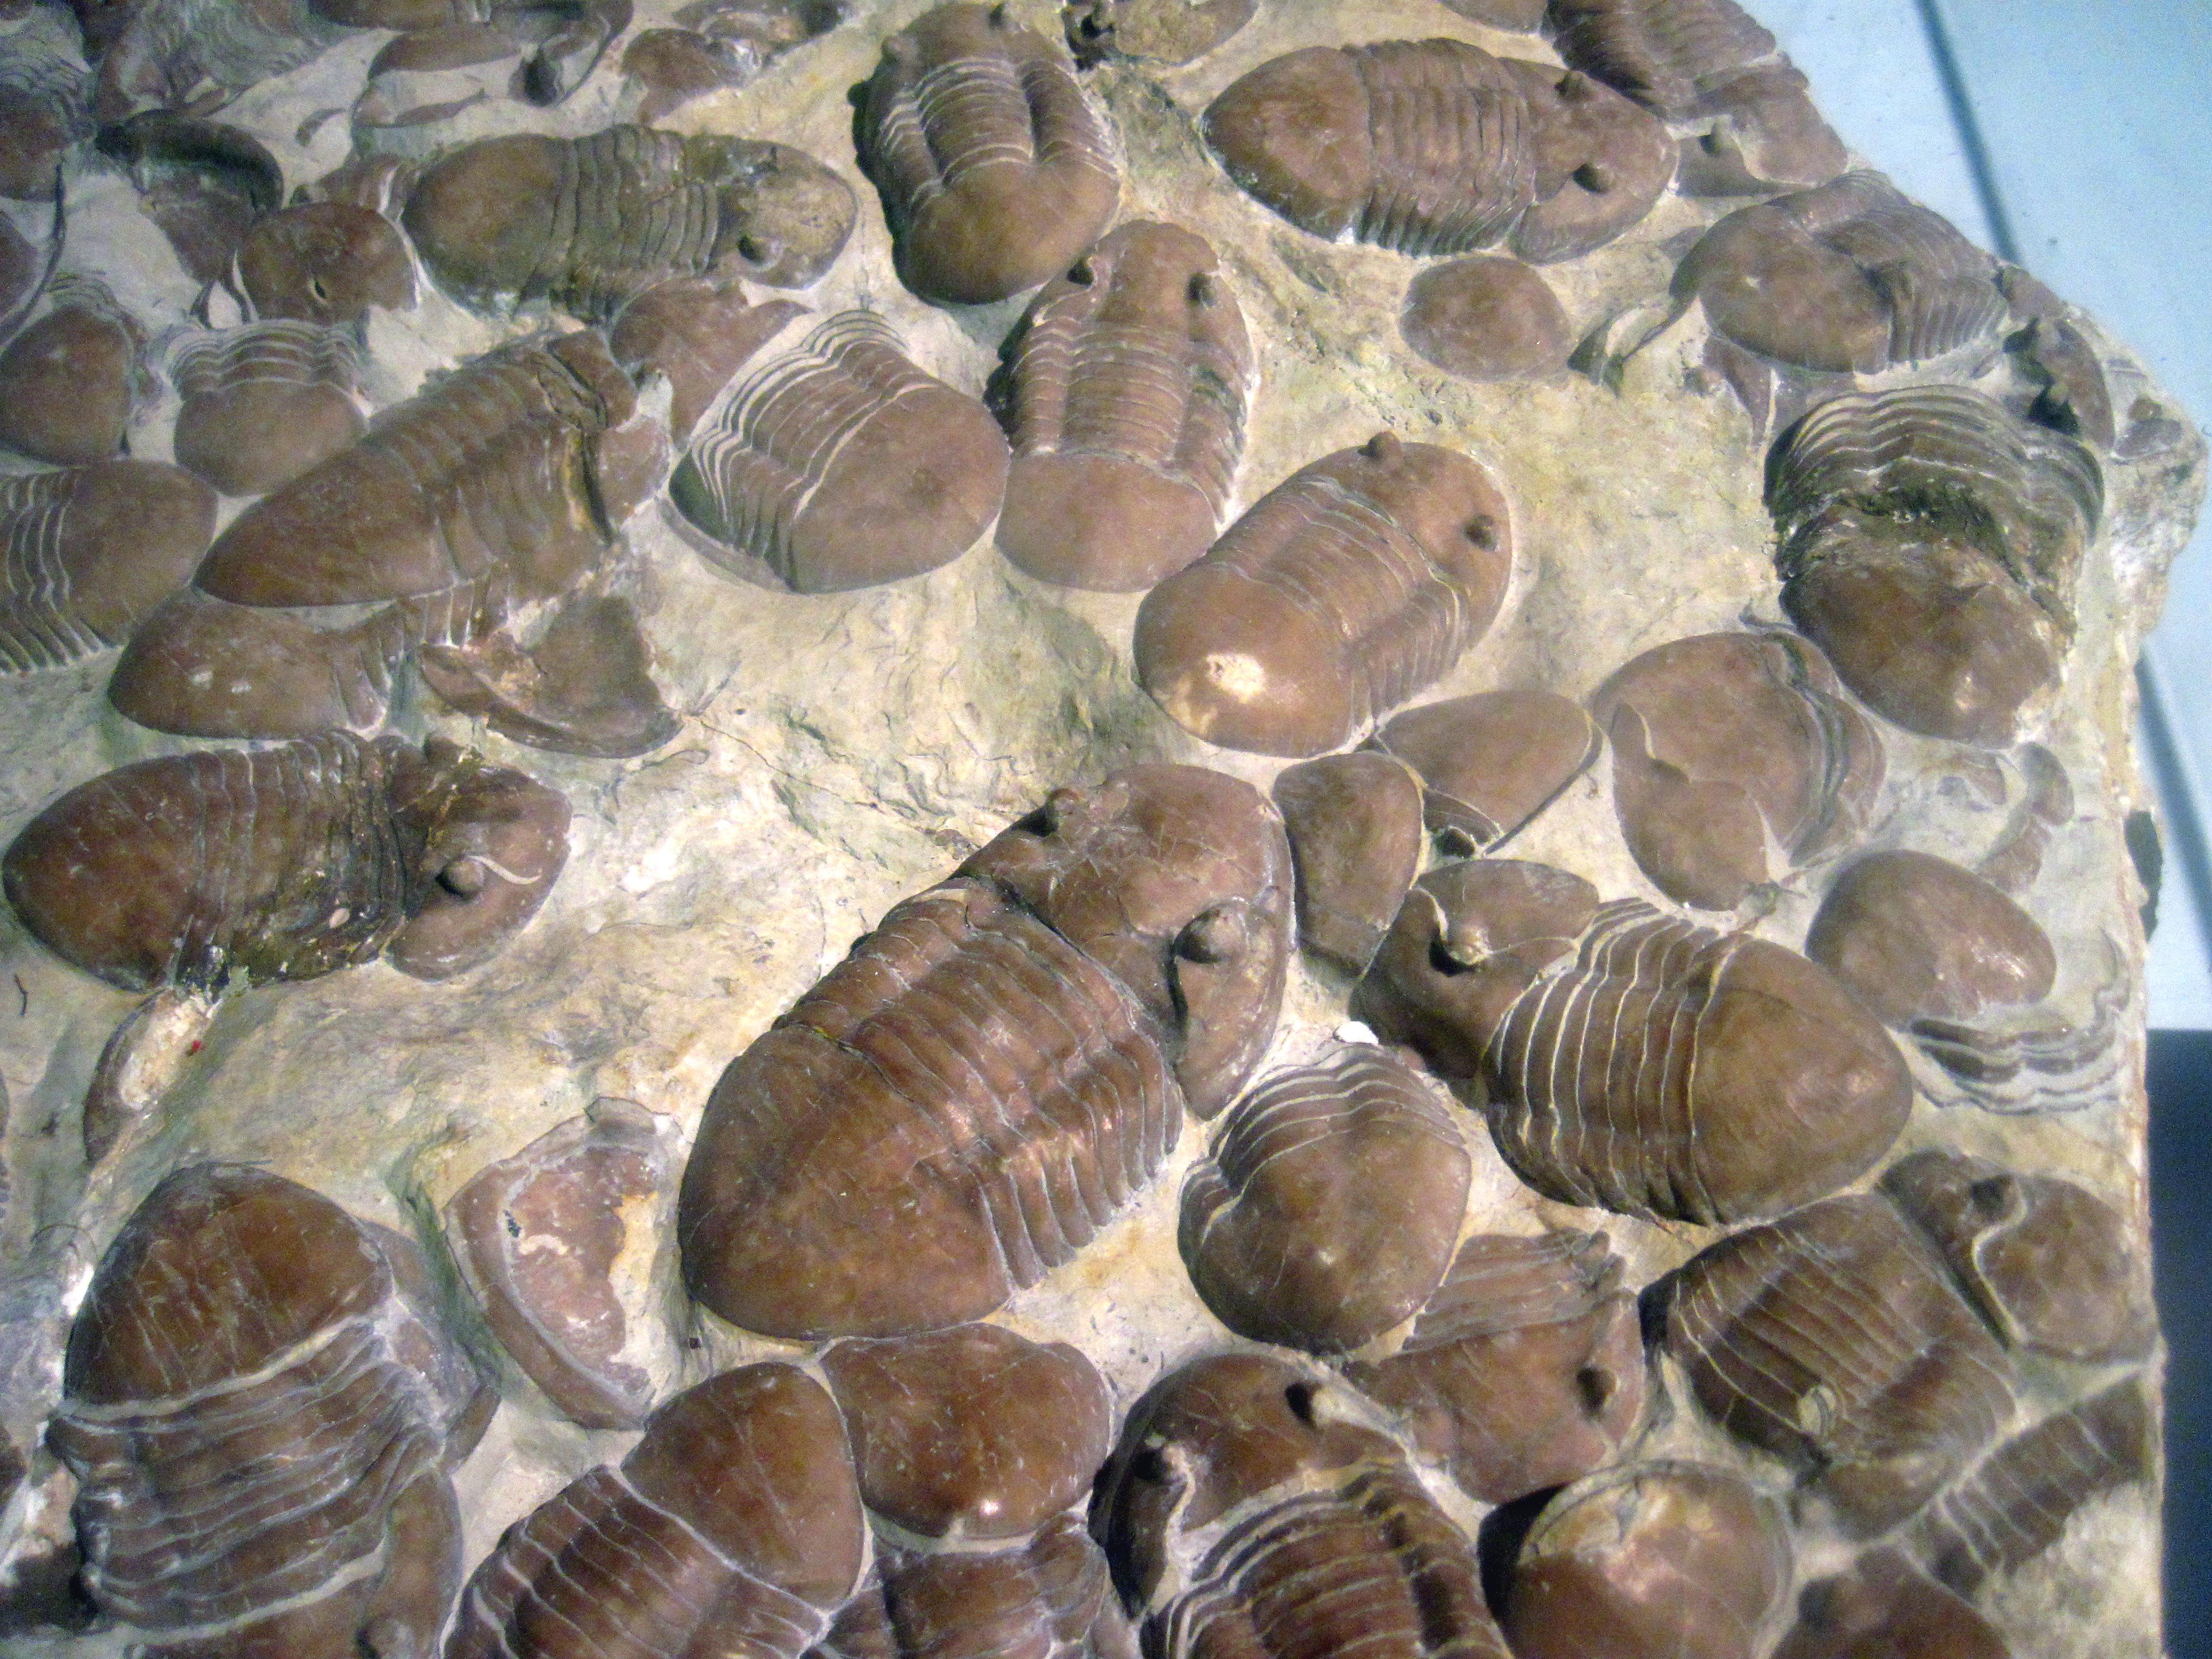 A cluster of fossilized trilobites embedded in rock from a time before mammals appeared.